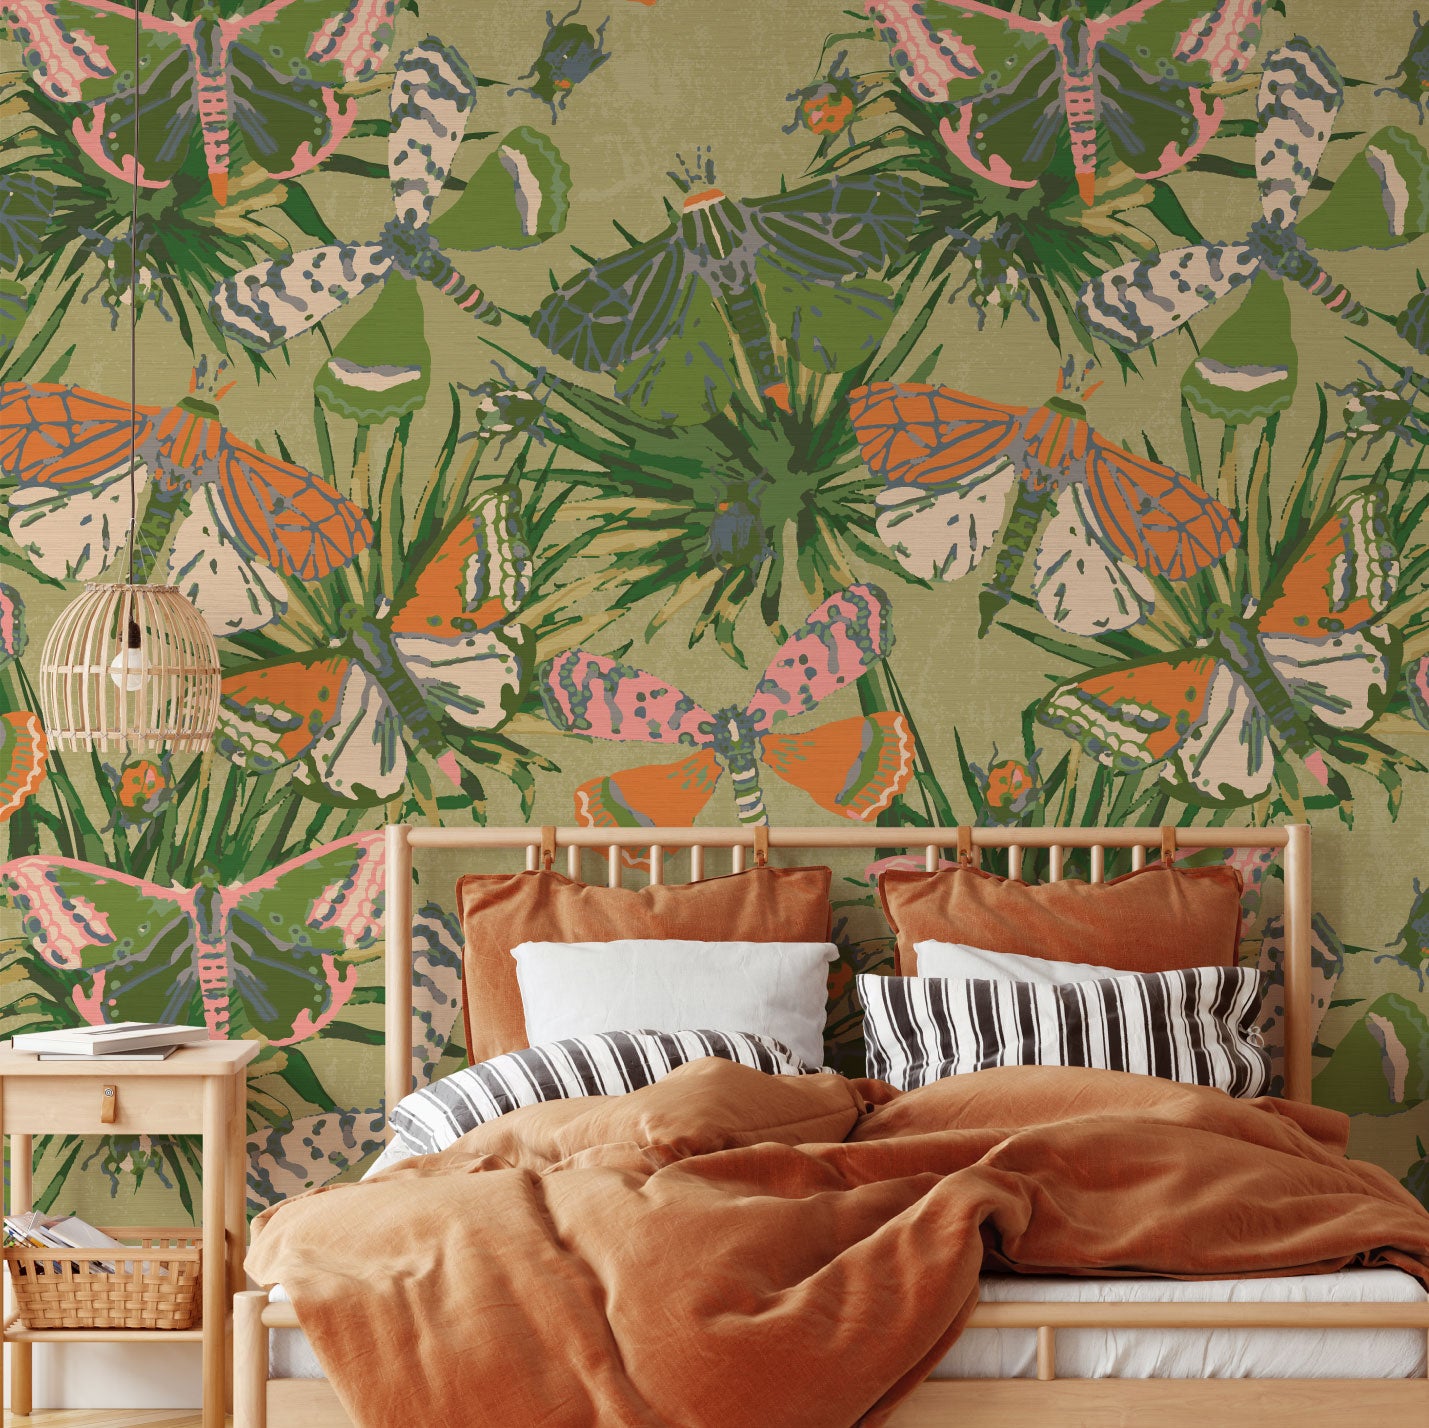 Grasscloth wallpaper Natural Textured Eco-Friendly Non-toxic High-quality Sustainable Interior Design Bold Custom Tailor-made Retro chic Bold tropical butterfly bug palm leaves animals botanical garden nature kids playroom bedroom nursery green moss jungle olive bedroom